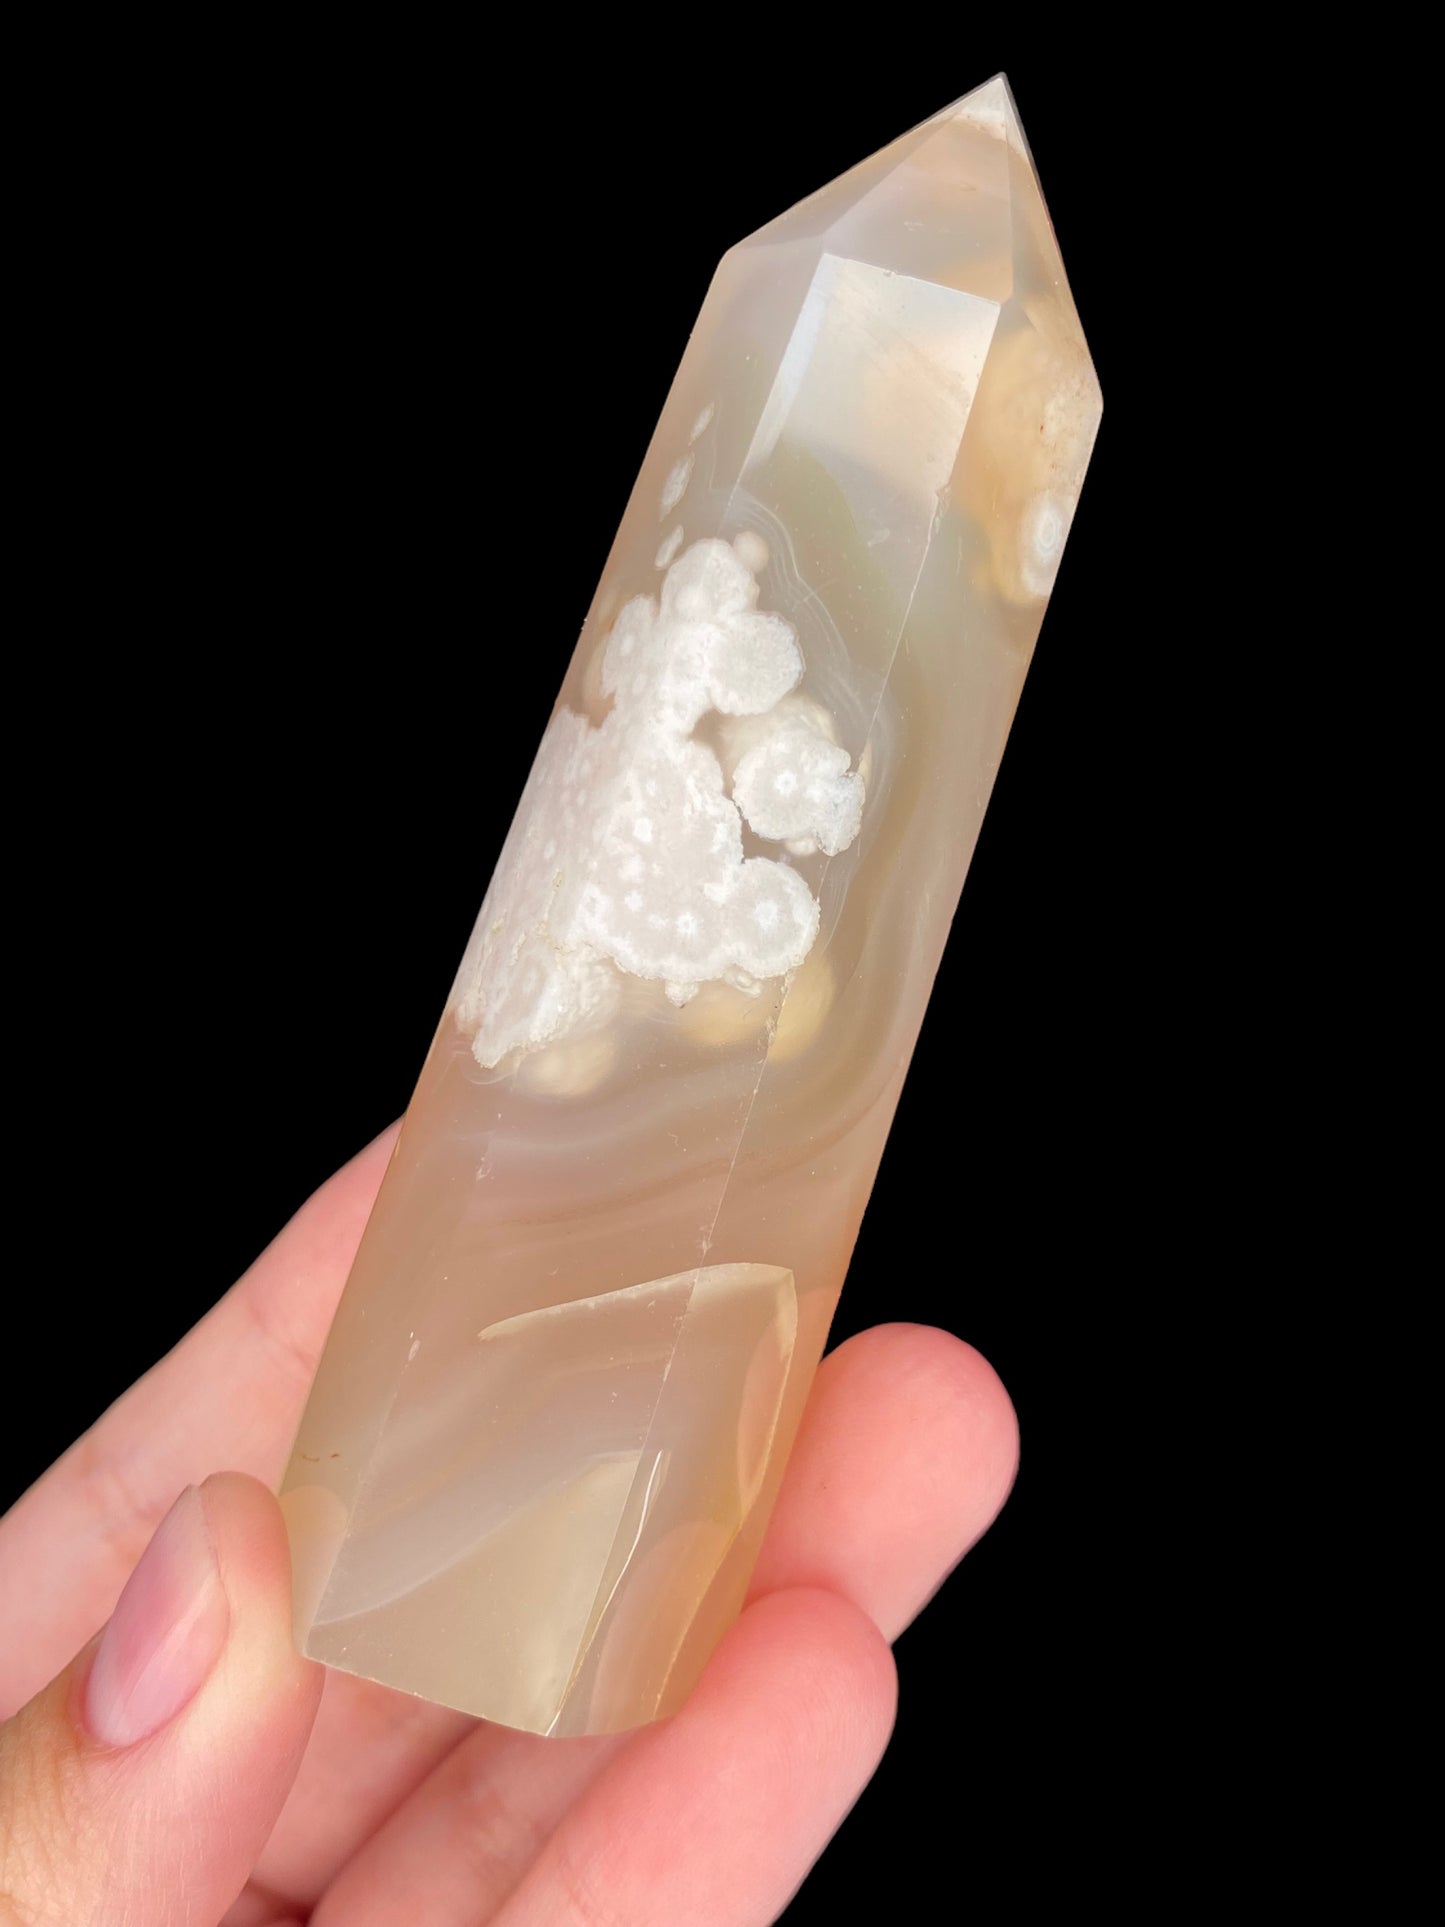 Flower Agate tower with incredible translucency